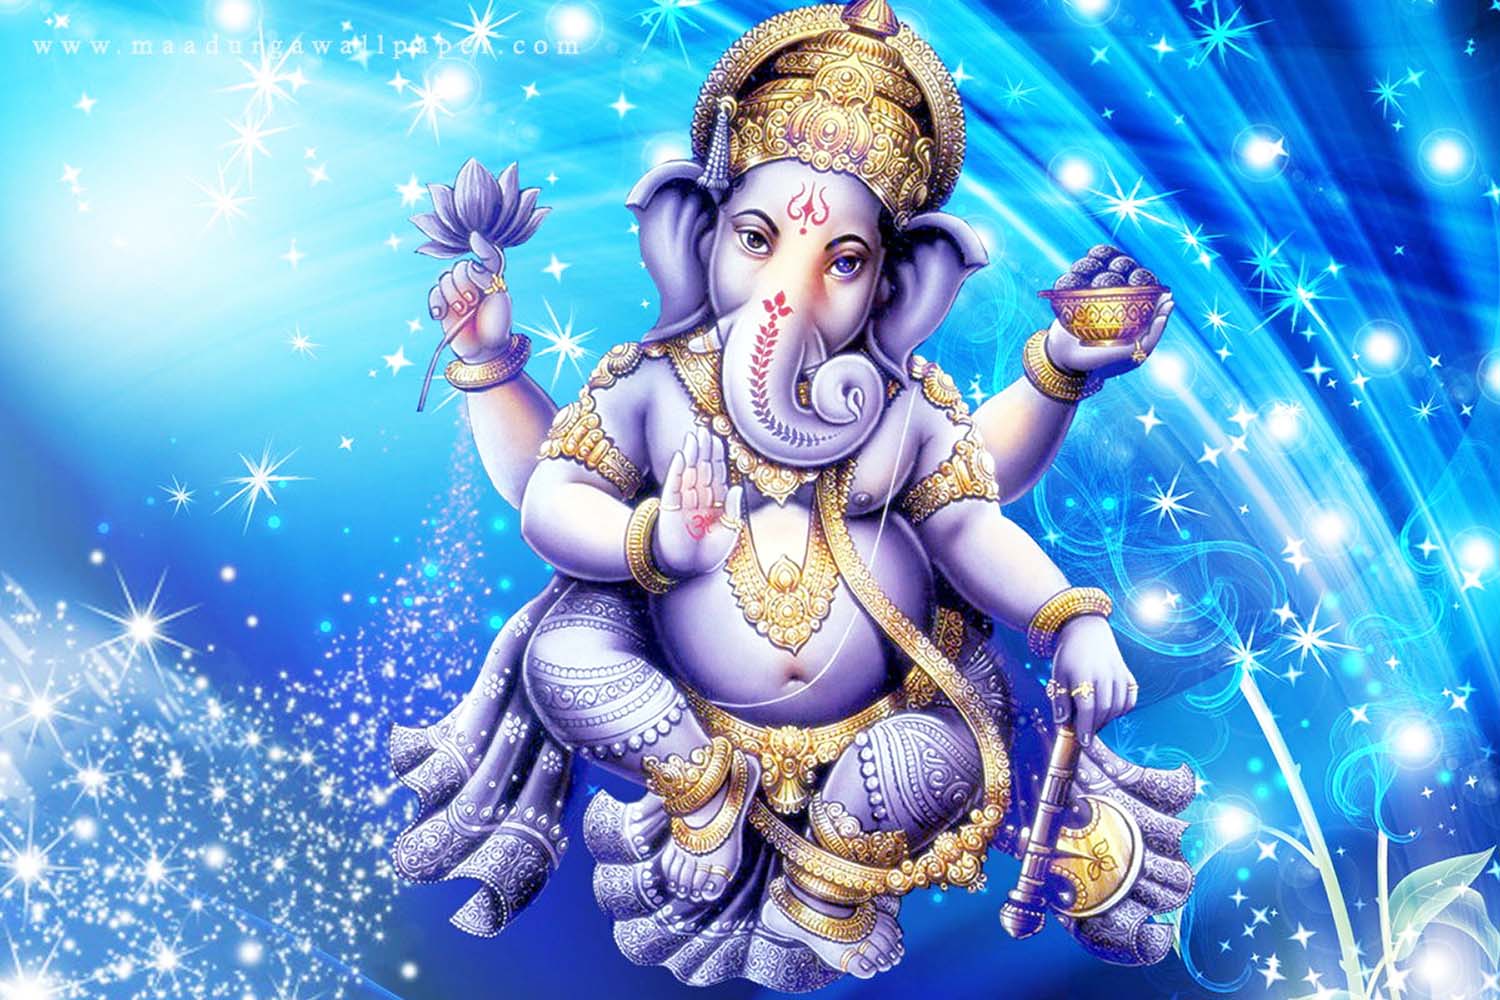 Best Eye-Catching Lord Vinayaka HD Images and wallpaper!